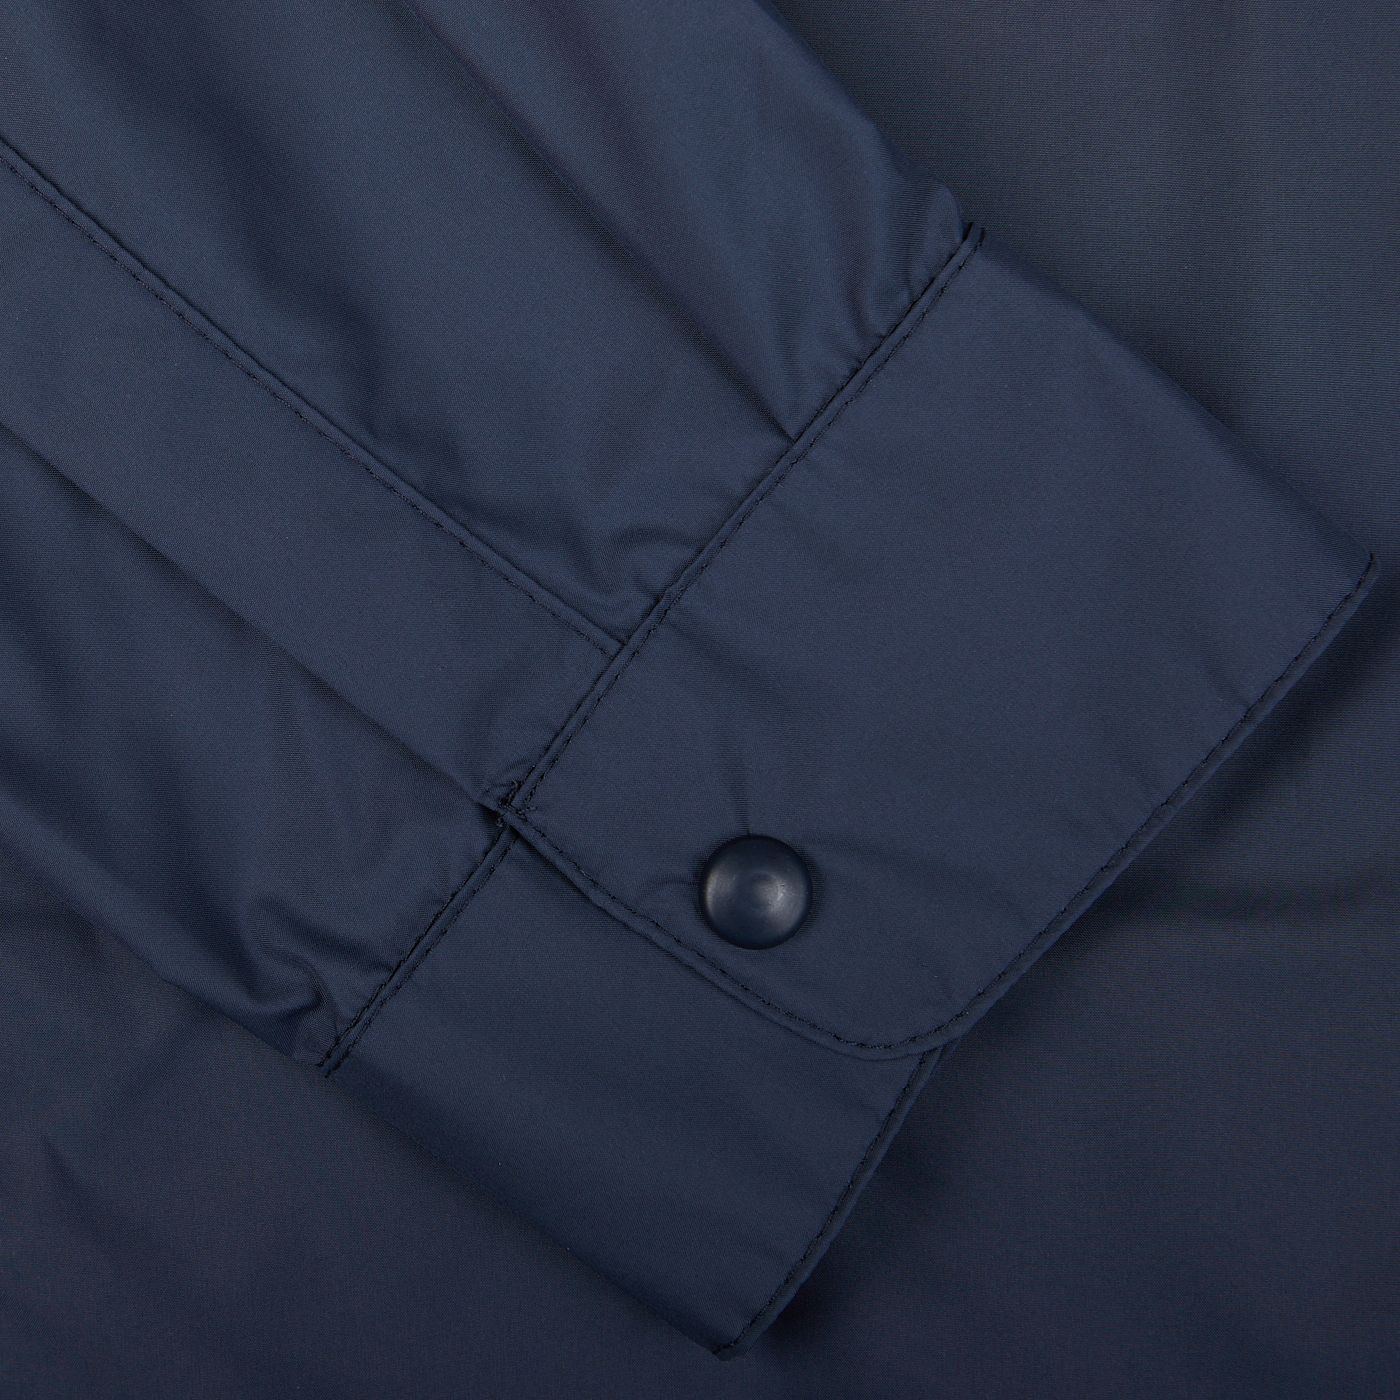 Close-up of a Mazzarelli navy blue nylon water resistant overshirt sleeve with a button closure.